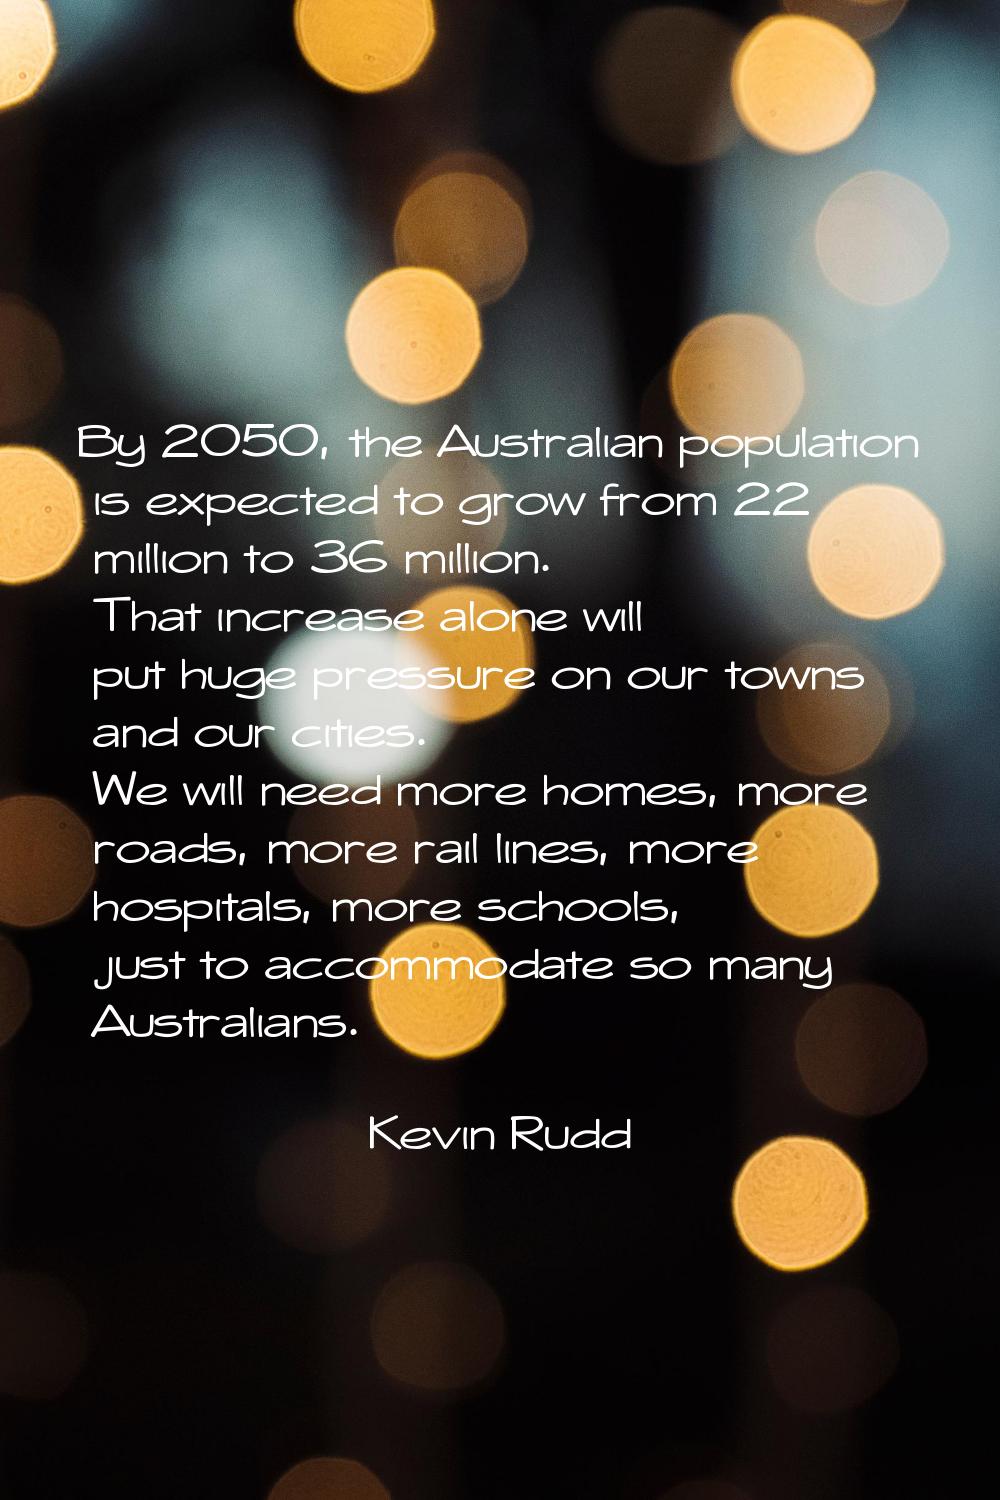 By 2050, the Australian population is expected to grow from 22 million to 36 million. That increase